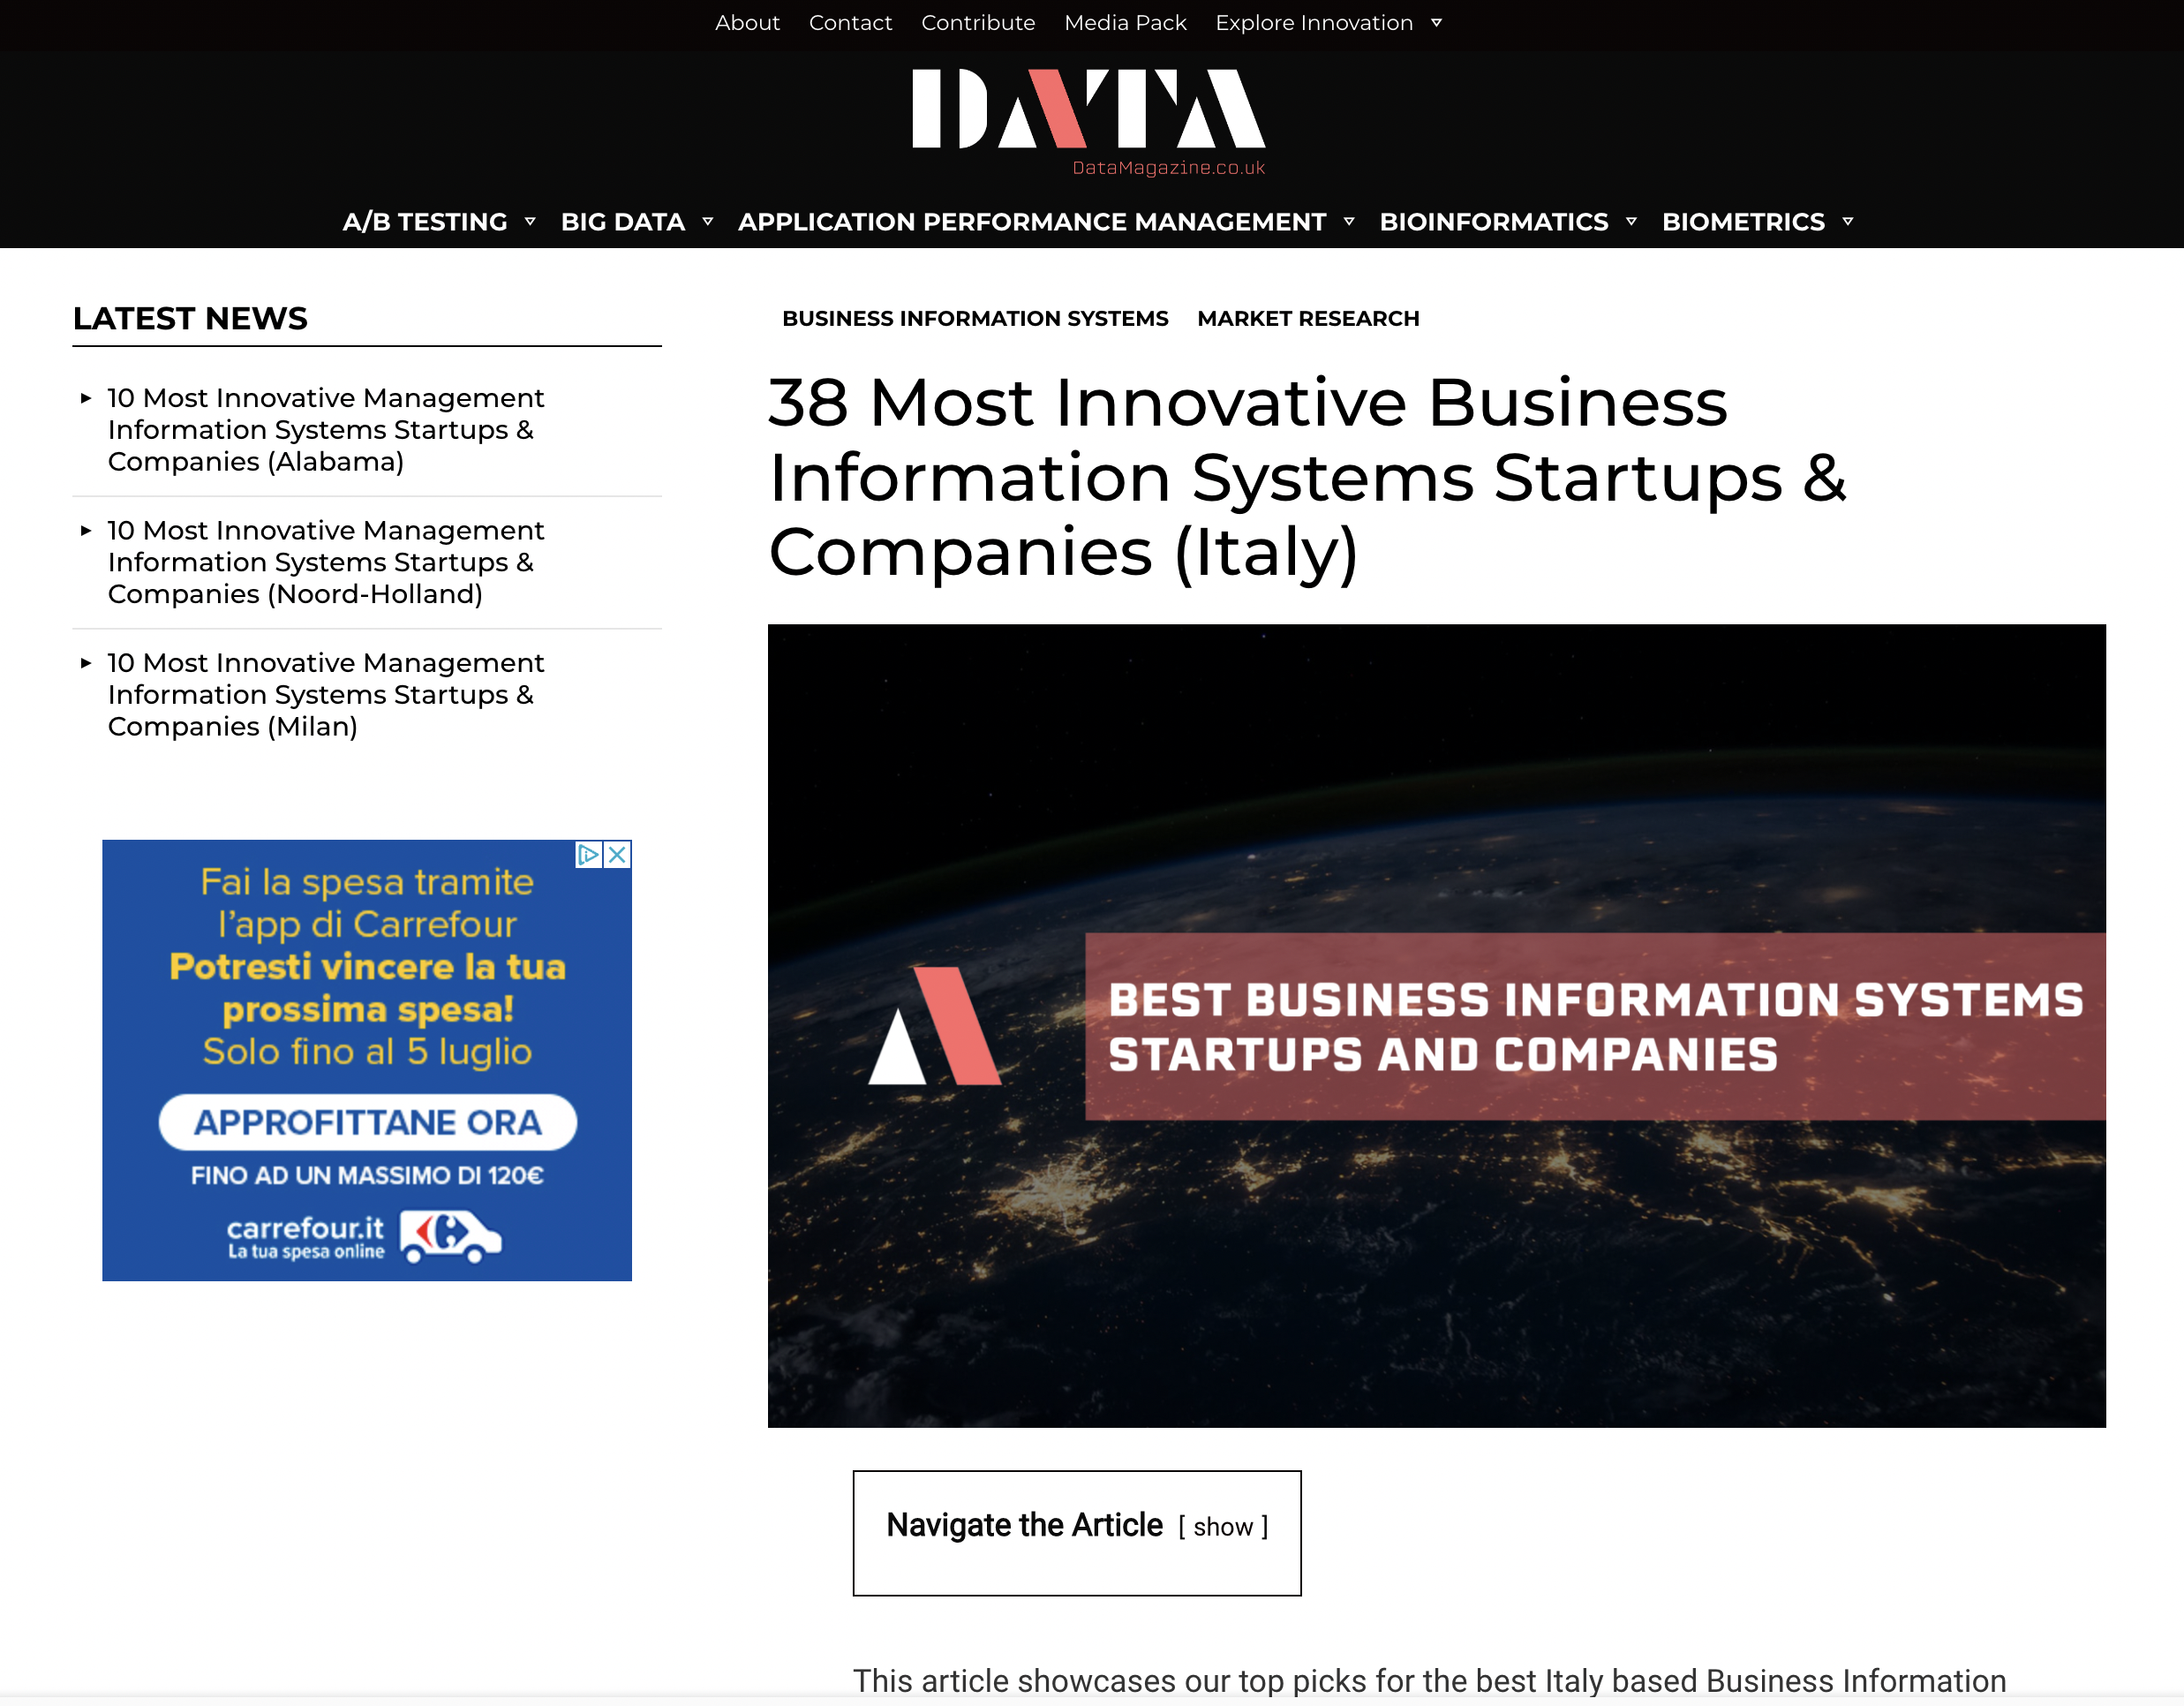 38 Most Innovative Business Information Systems Startups & Companies (Italy)